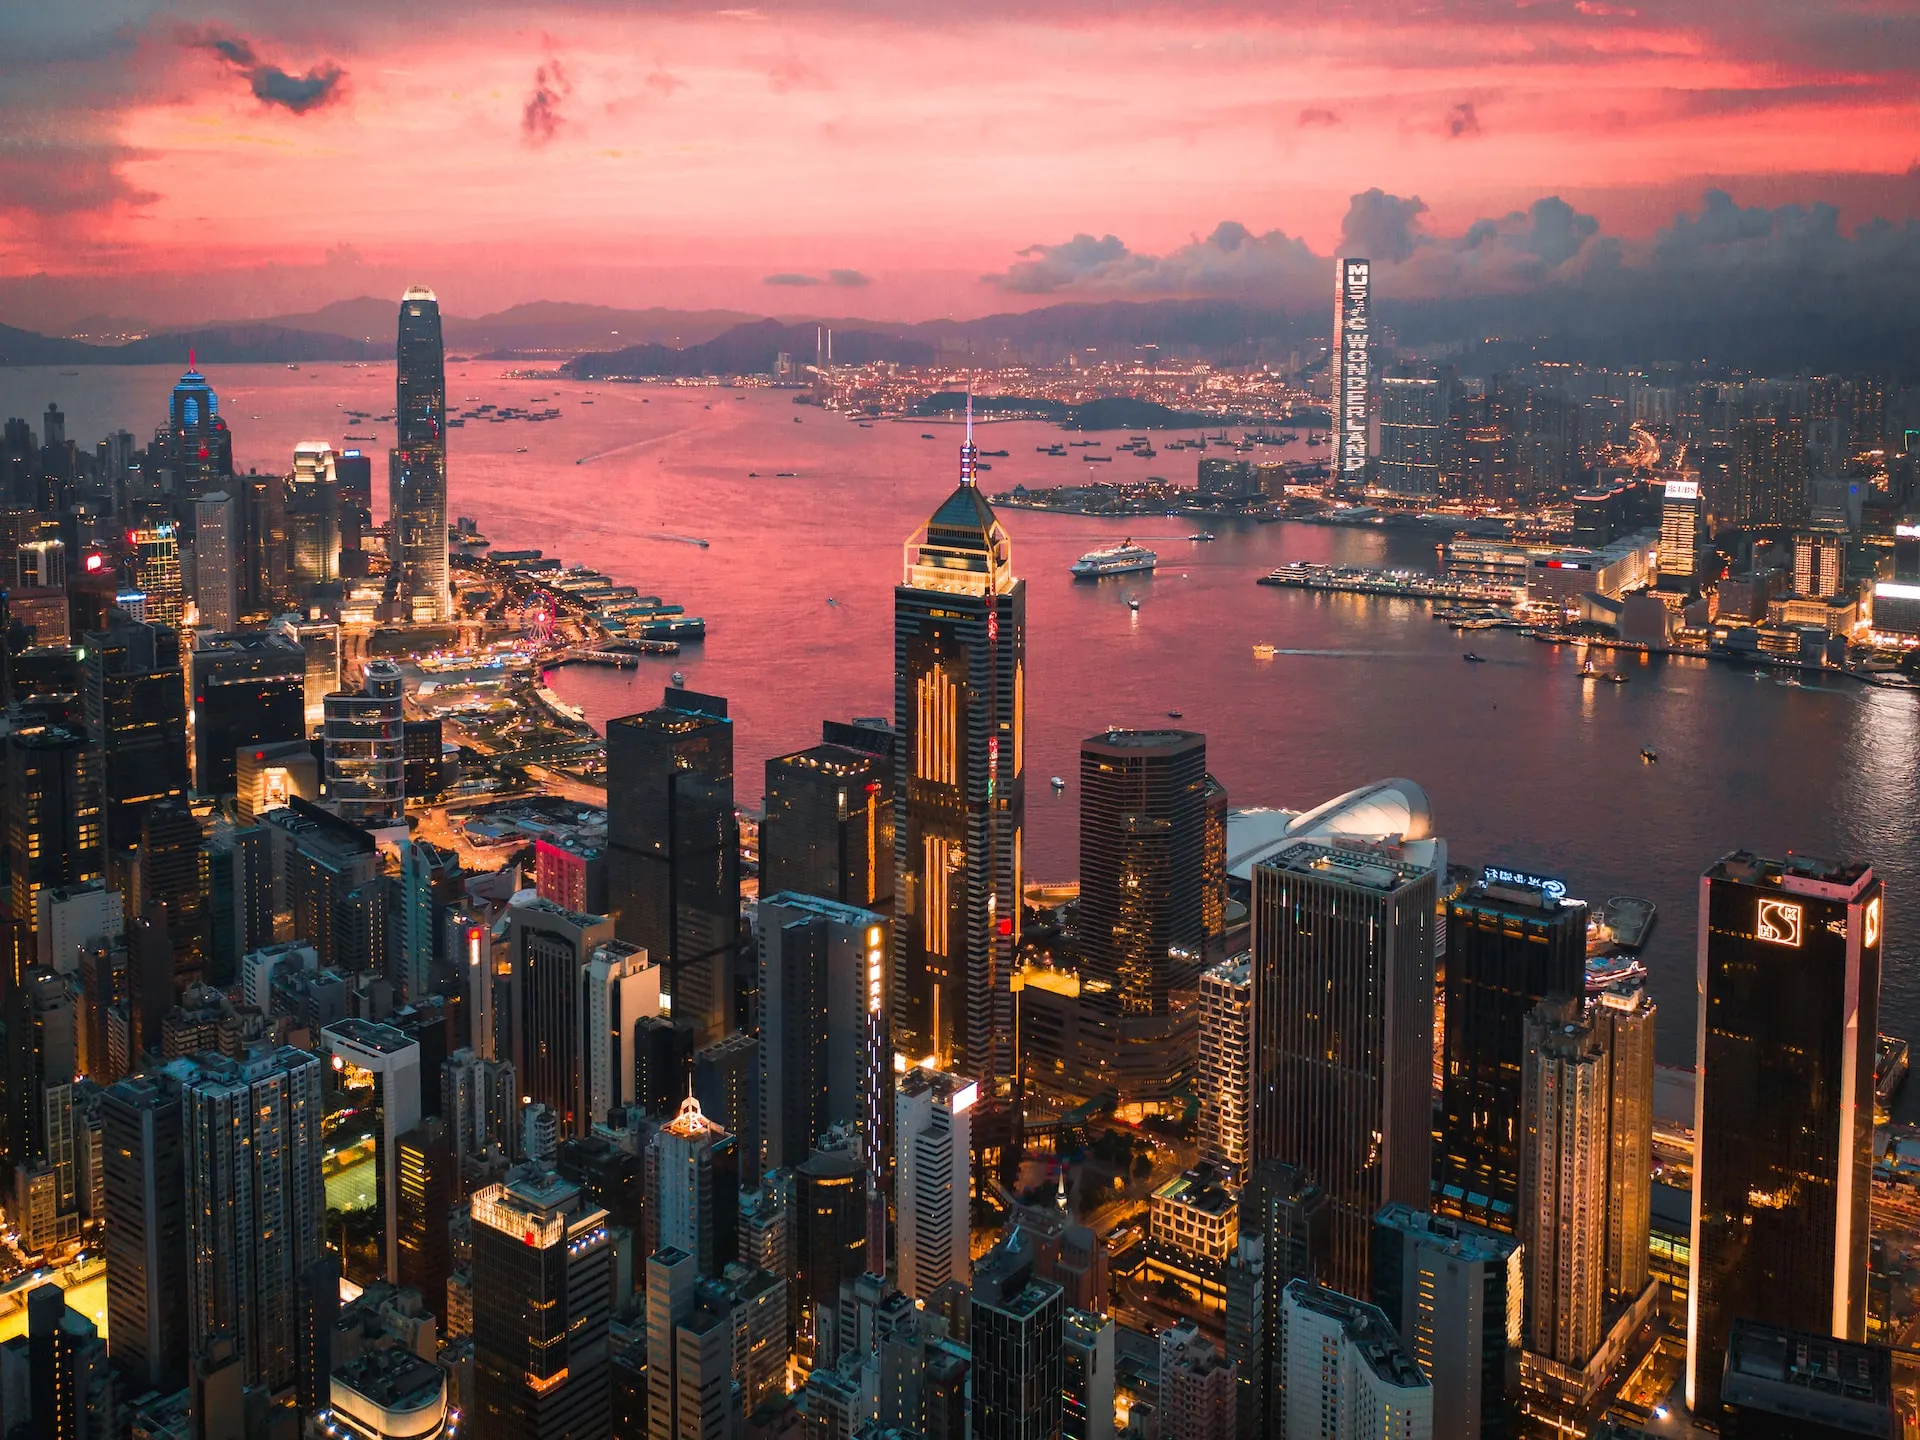 Aerial view of Hong Kong. Source: Photo by Manson Yim on Unsplash